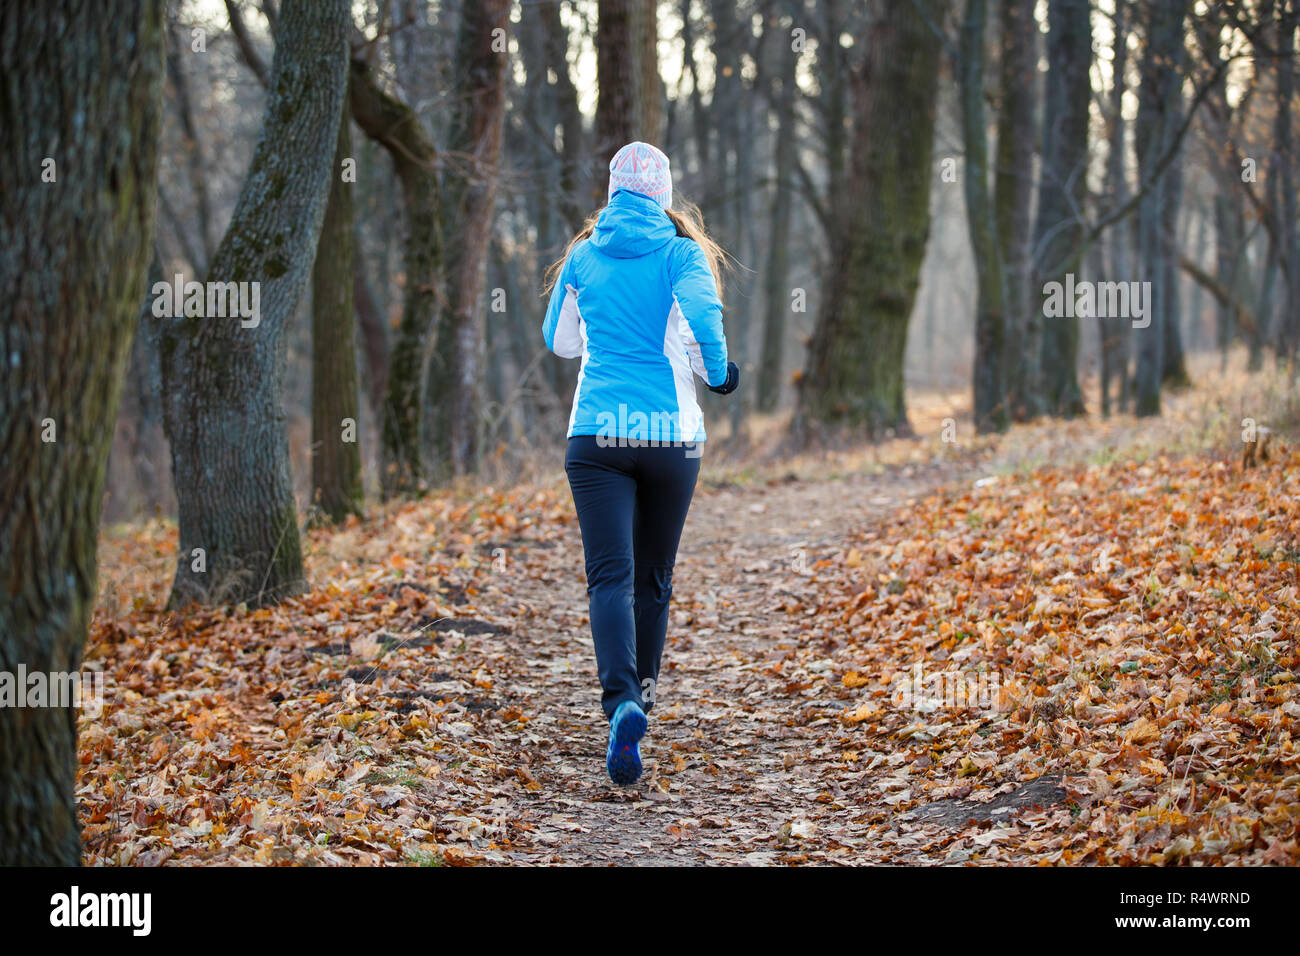 Young slim woman running in cold weather in late fall. Rear view jogging image Stock Photo